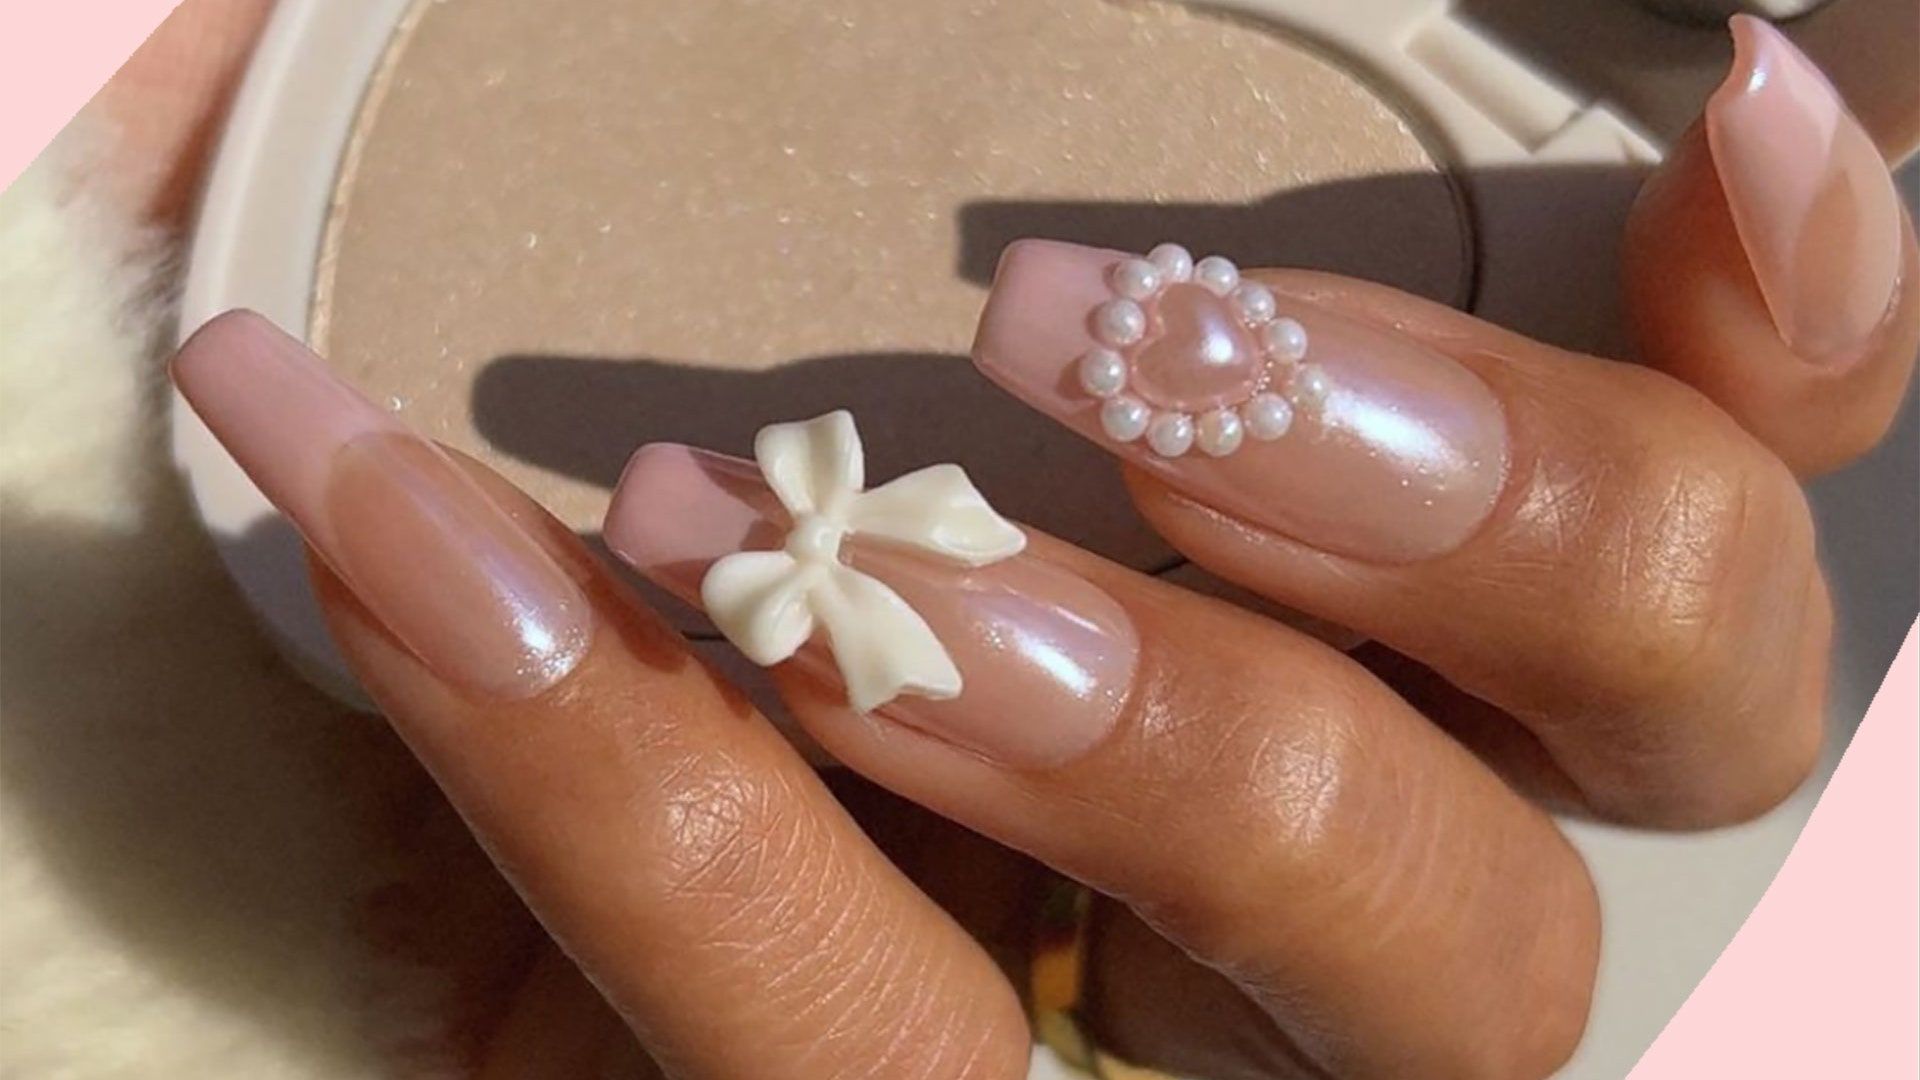 A woman's hand with long, almond-shaped nails painted in pale pink and adorned with white bows and pearls. - Coquette